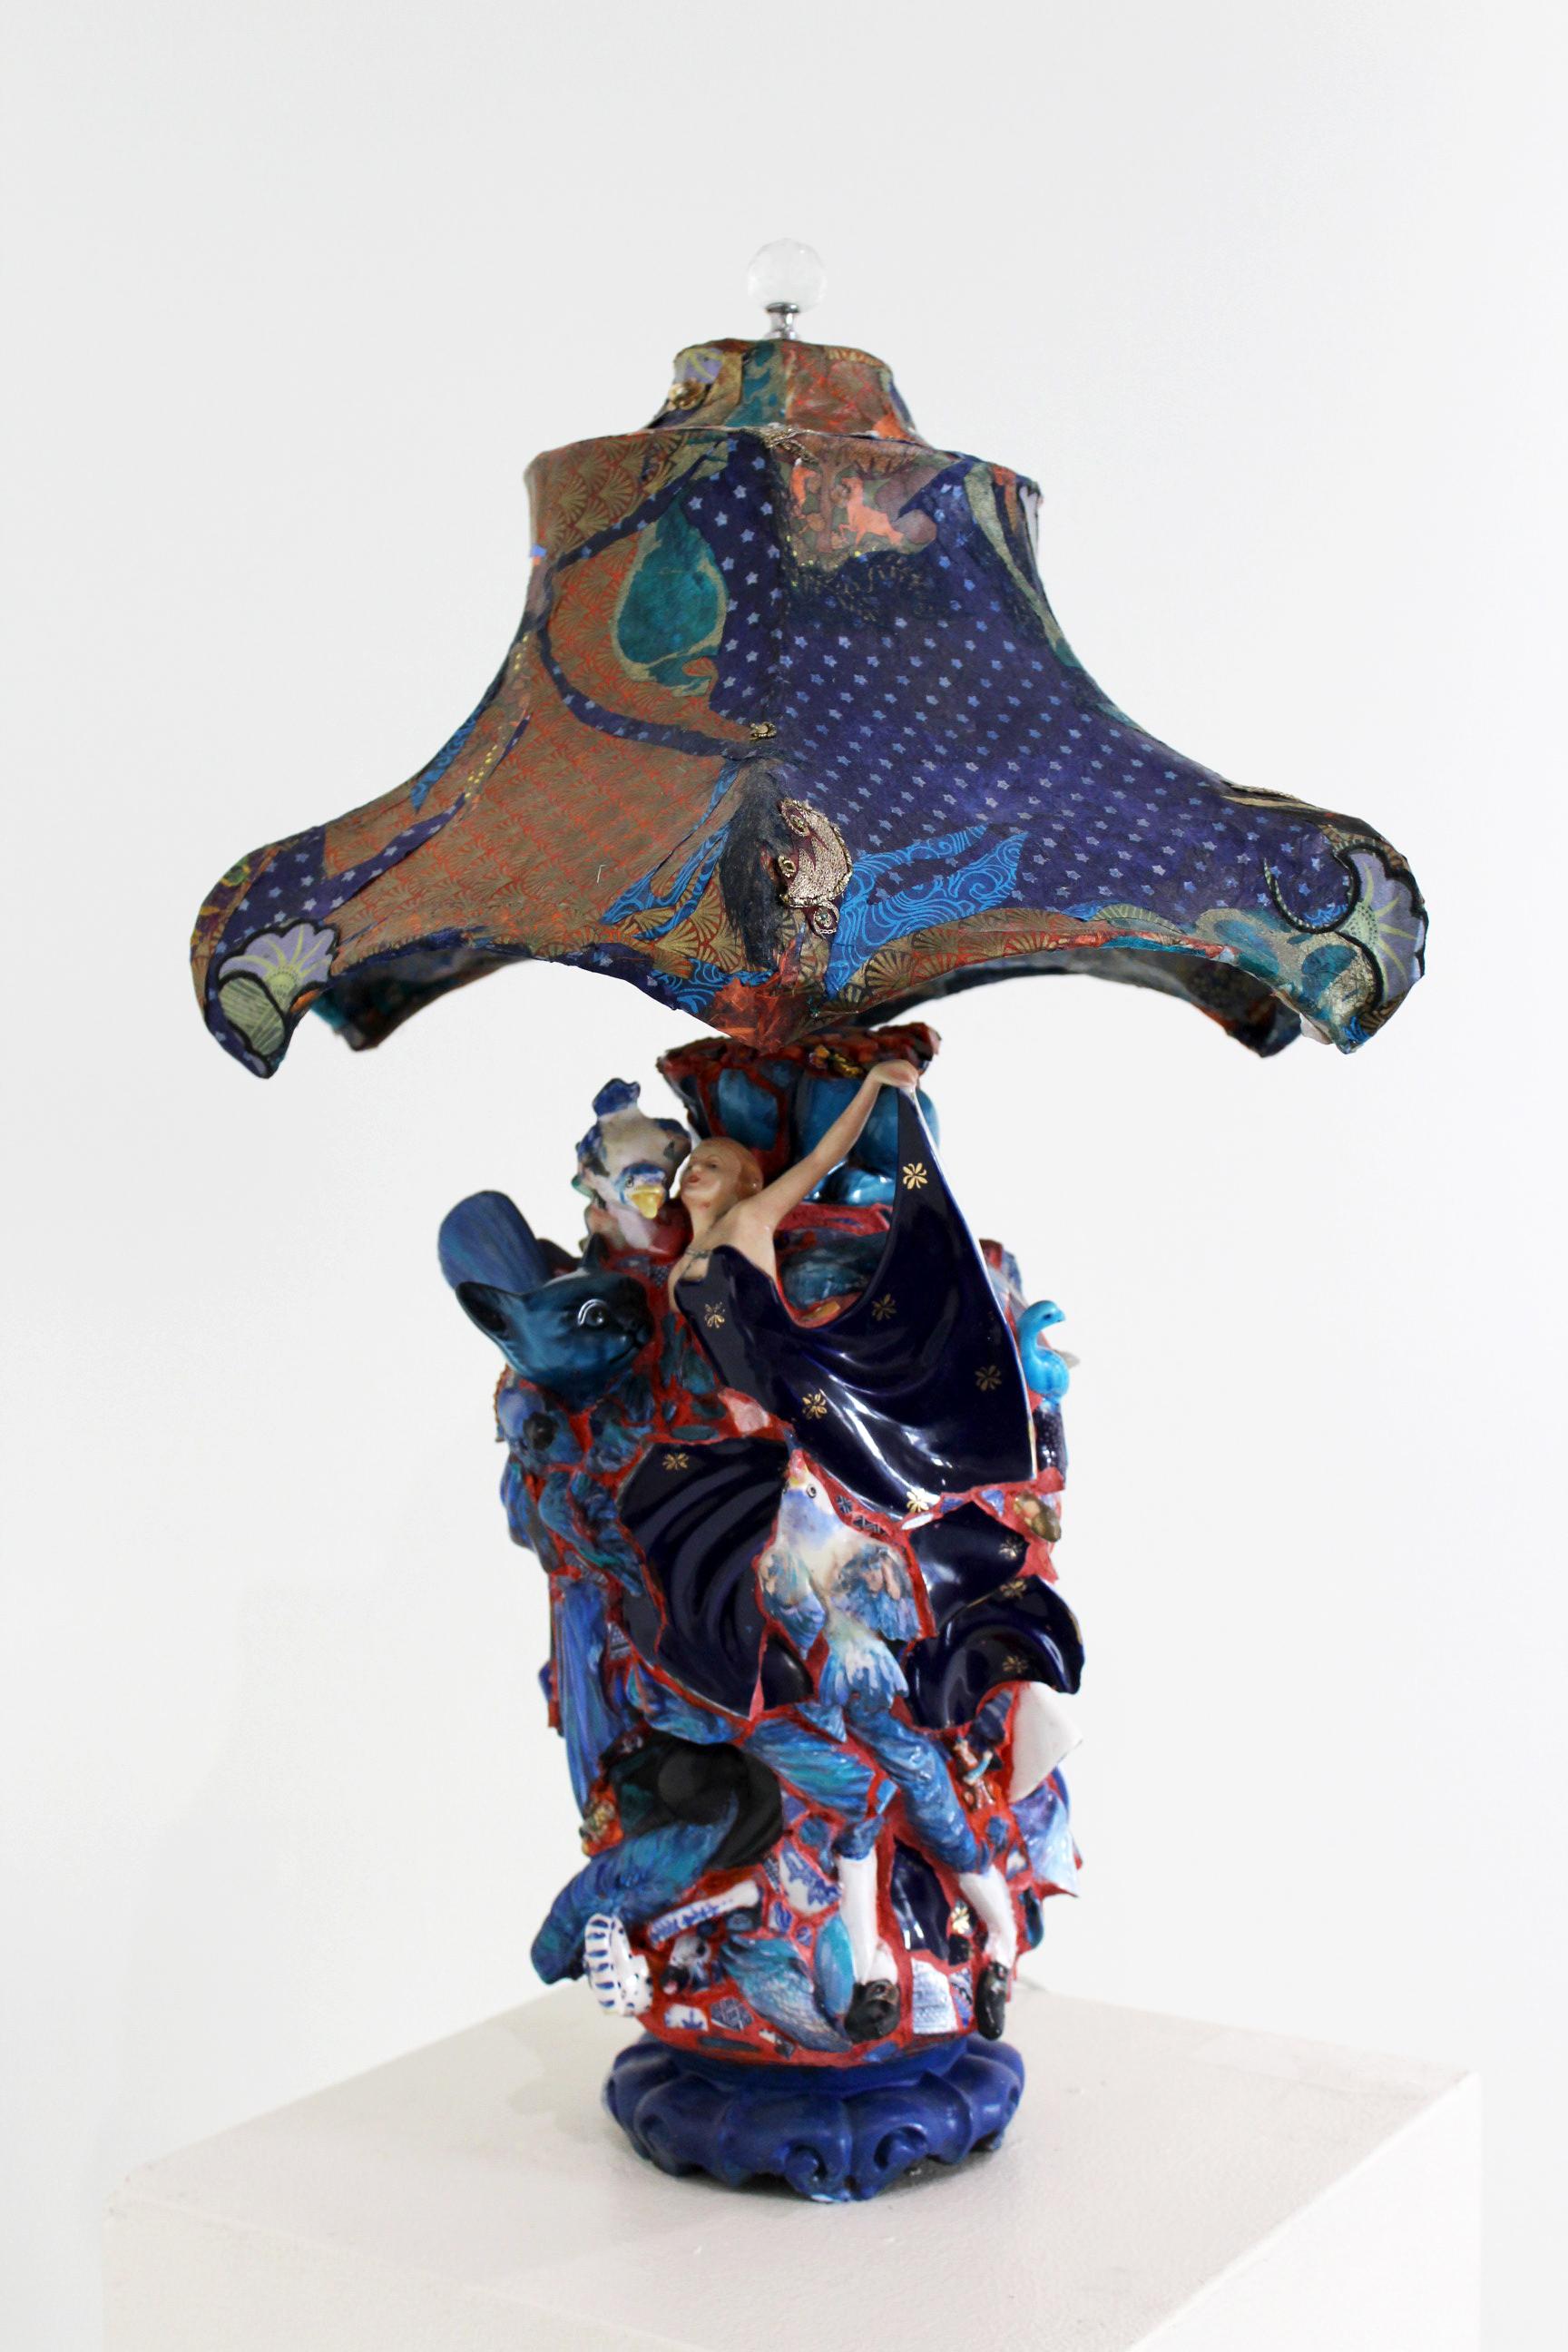 "Tangled Up in Blue" mixed media, functional, found & broken figurine pieces - Sculpture by Shannon Landis Hansen